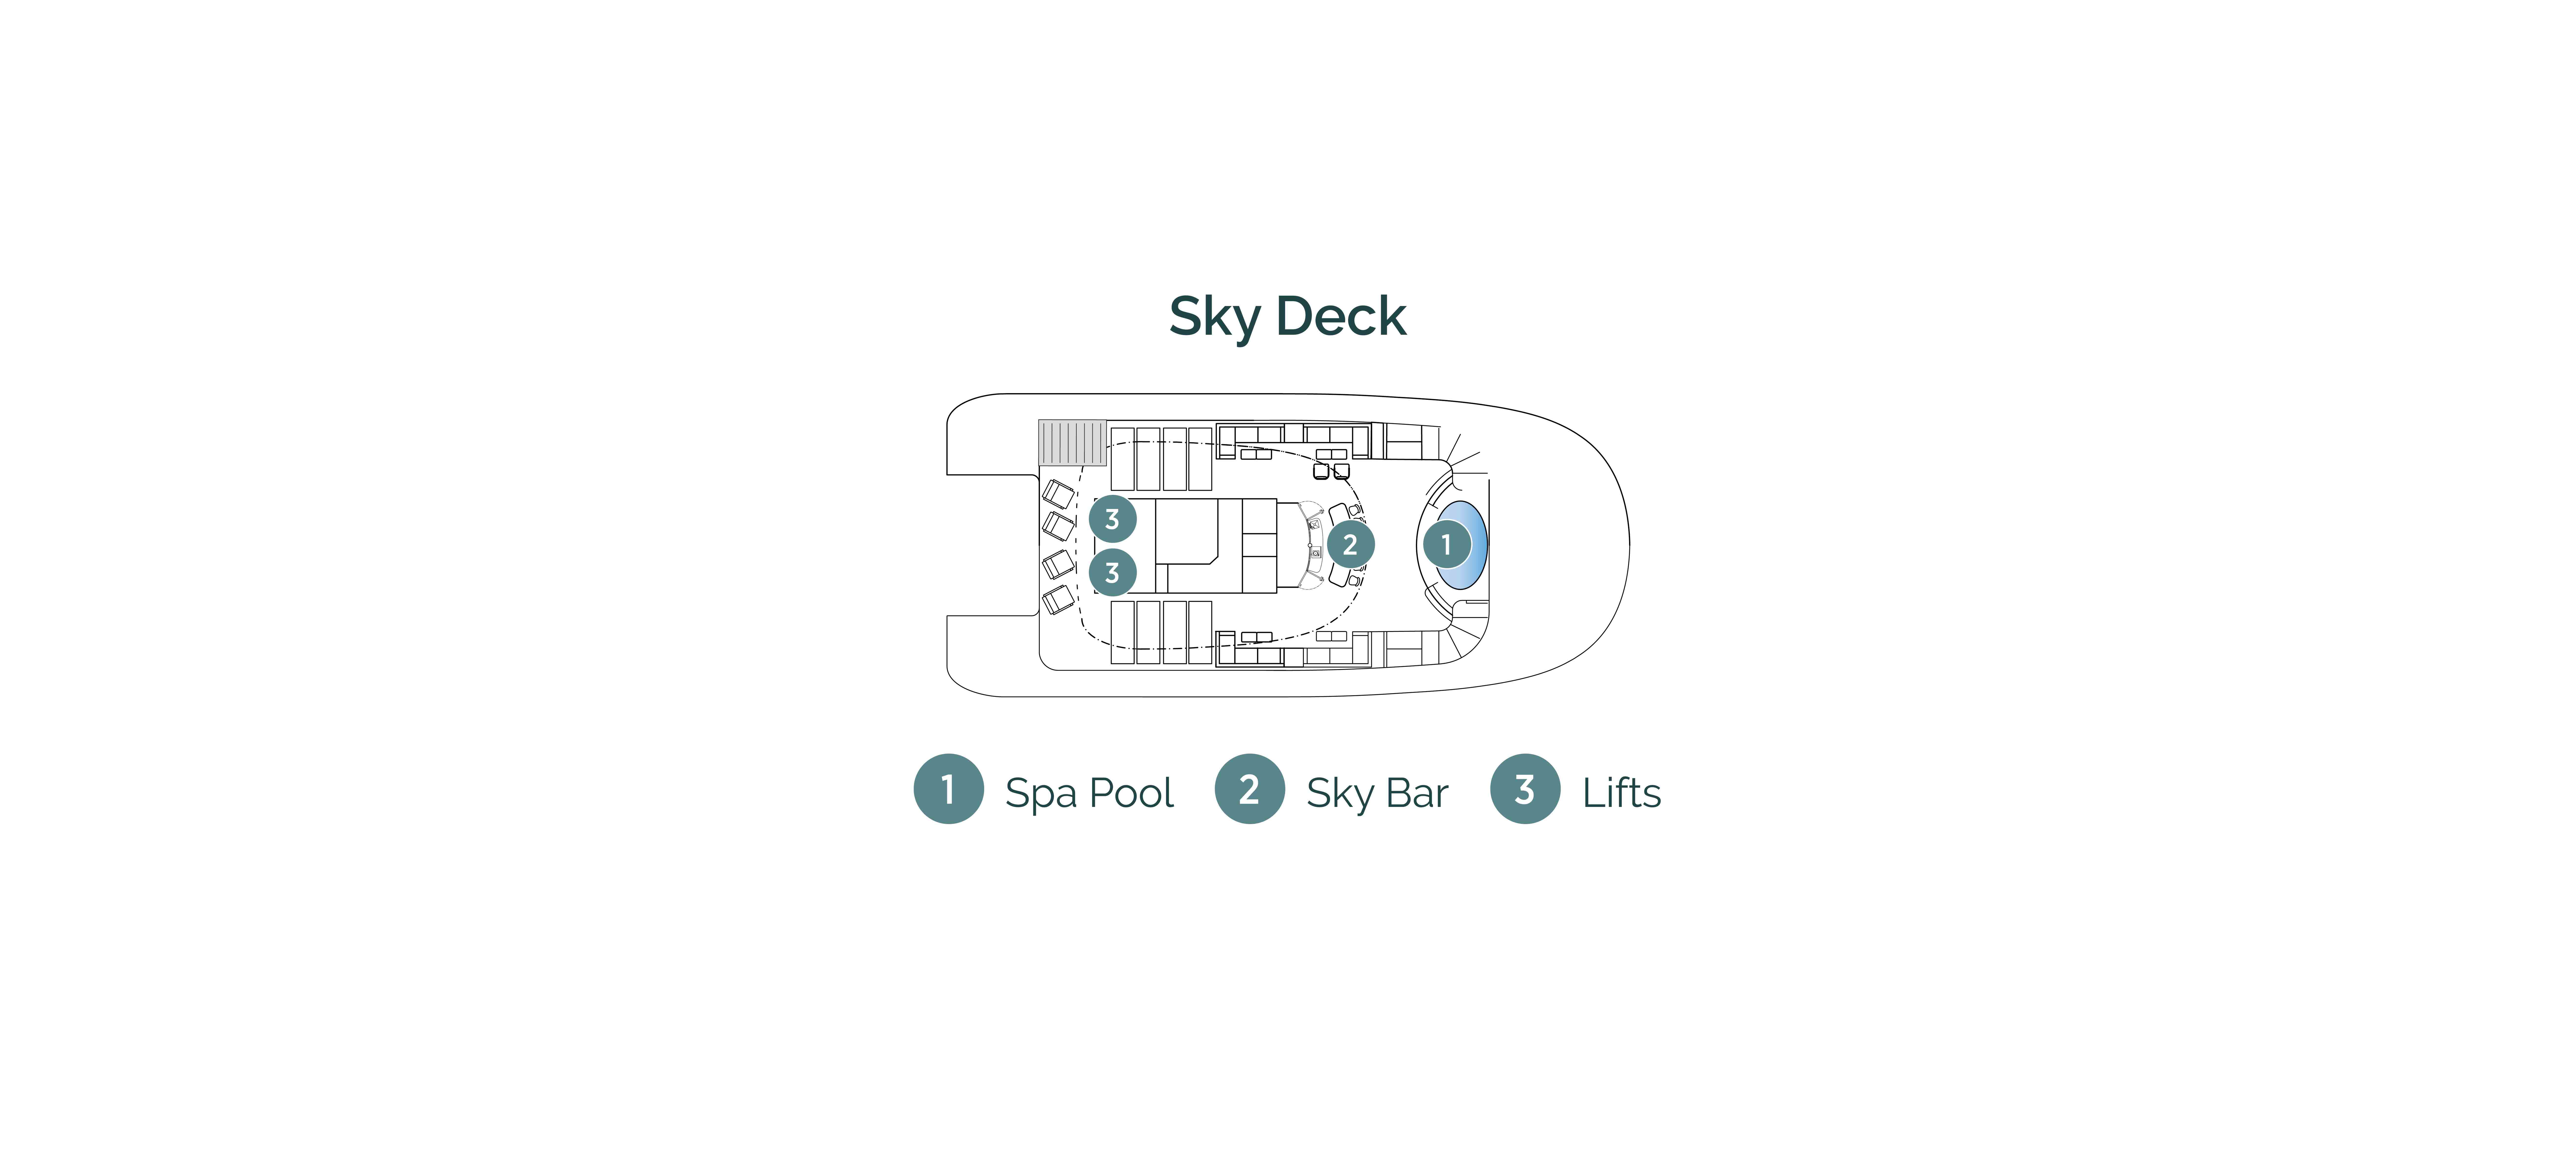 Diagram of ship layout for the Sky Deck of an Emerald Cruises luxury yacht